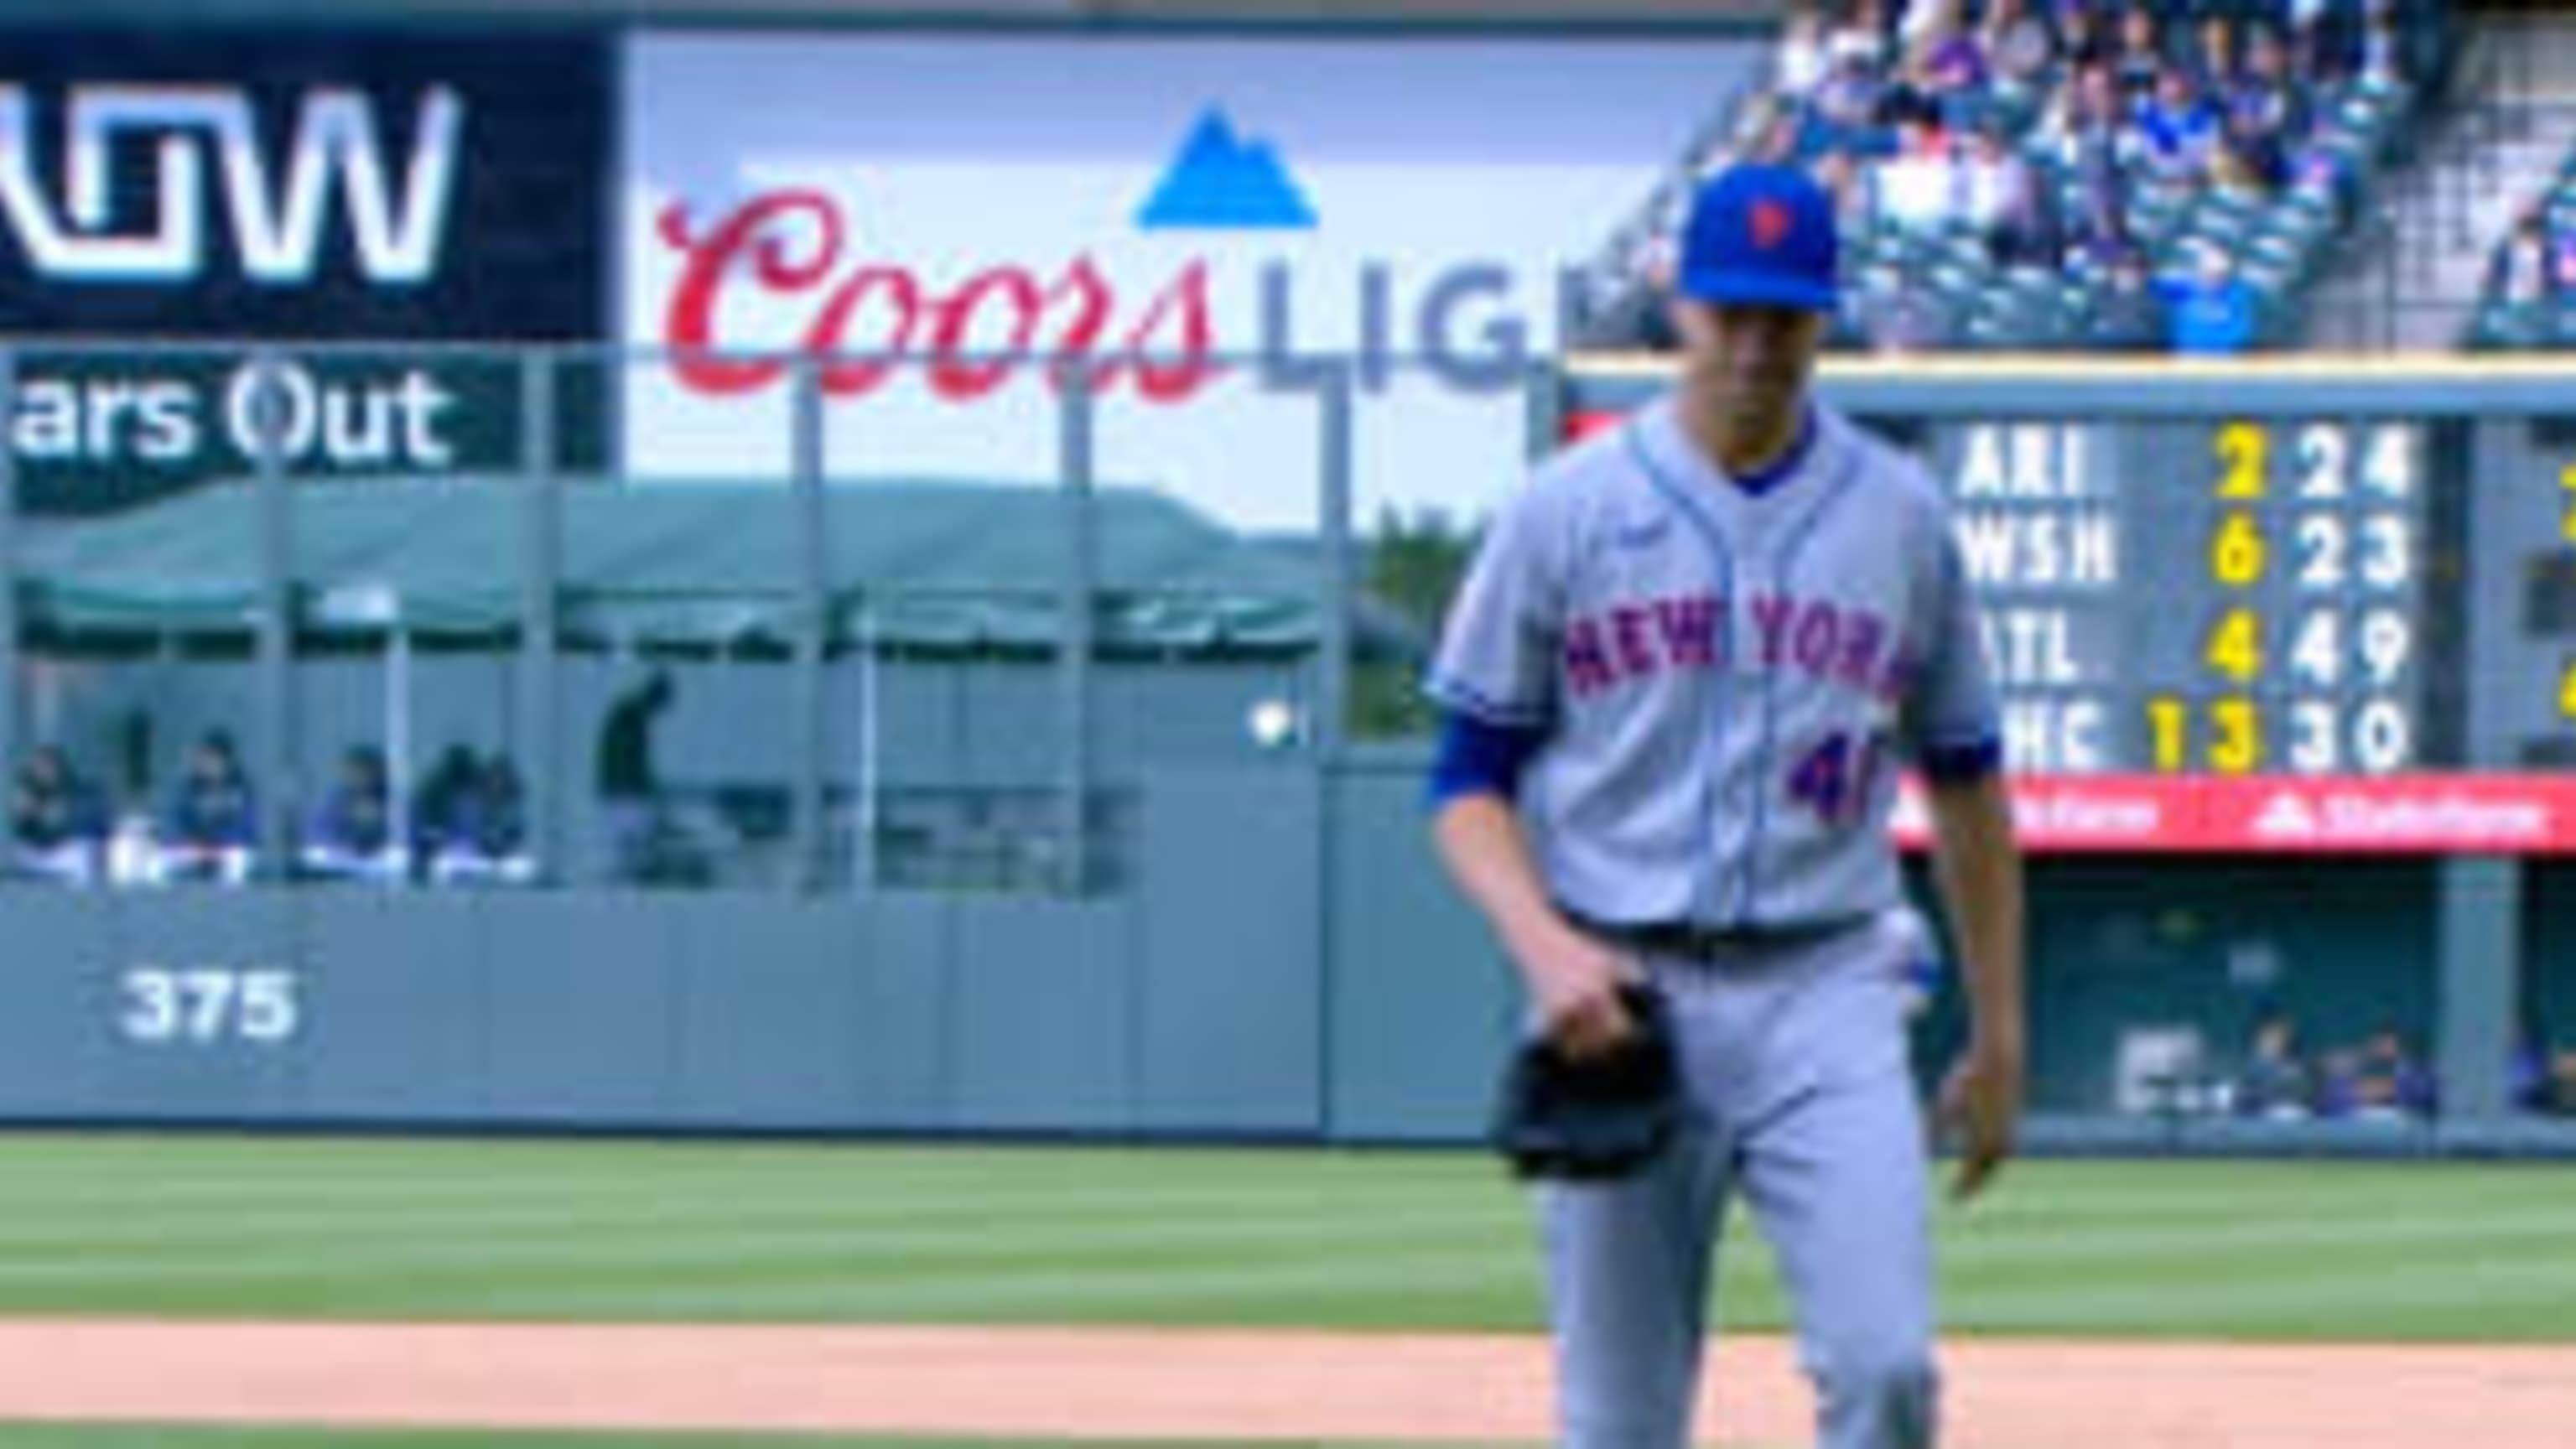 New York Mets starting pitcher Jacob deGrom strikes out Yankees